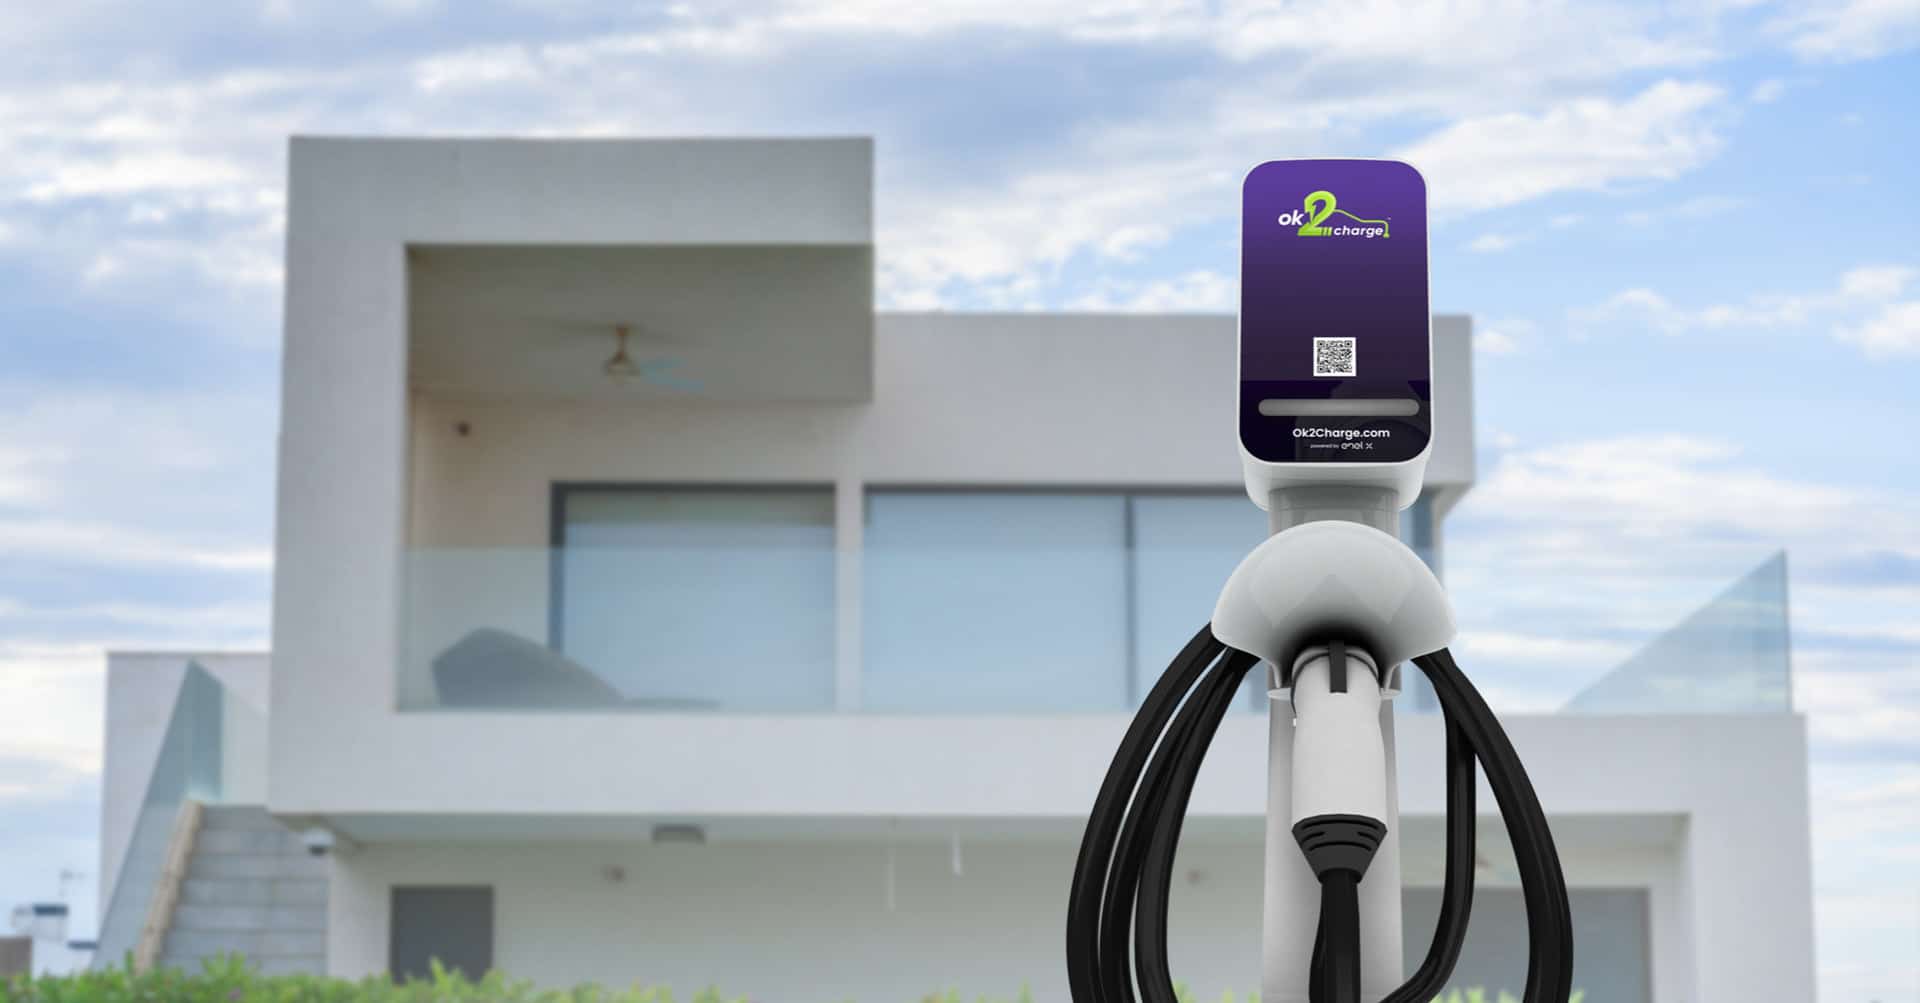 ENEL X AND OK2CHARGE MODERNIZE VACATION RENTALS WITH SMART EV CHARGING SOLUTIONS TO SUPPORT MORE SUSTAINABLE TRAVEL